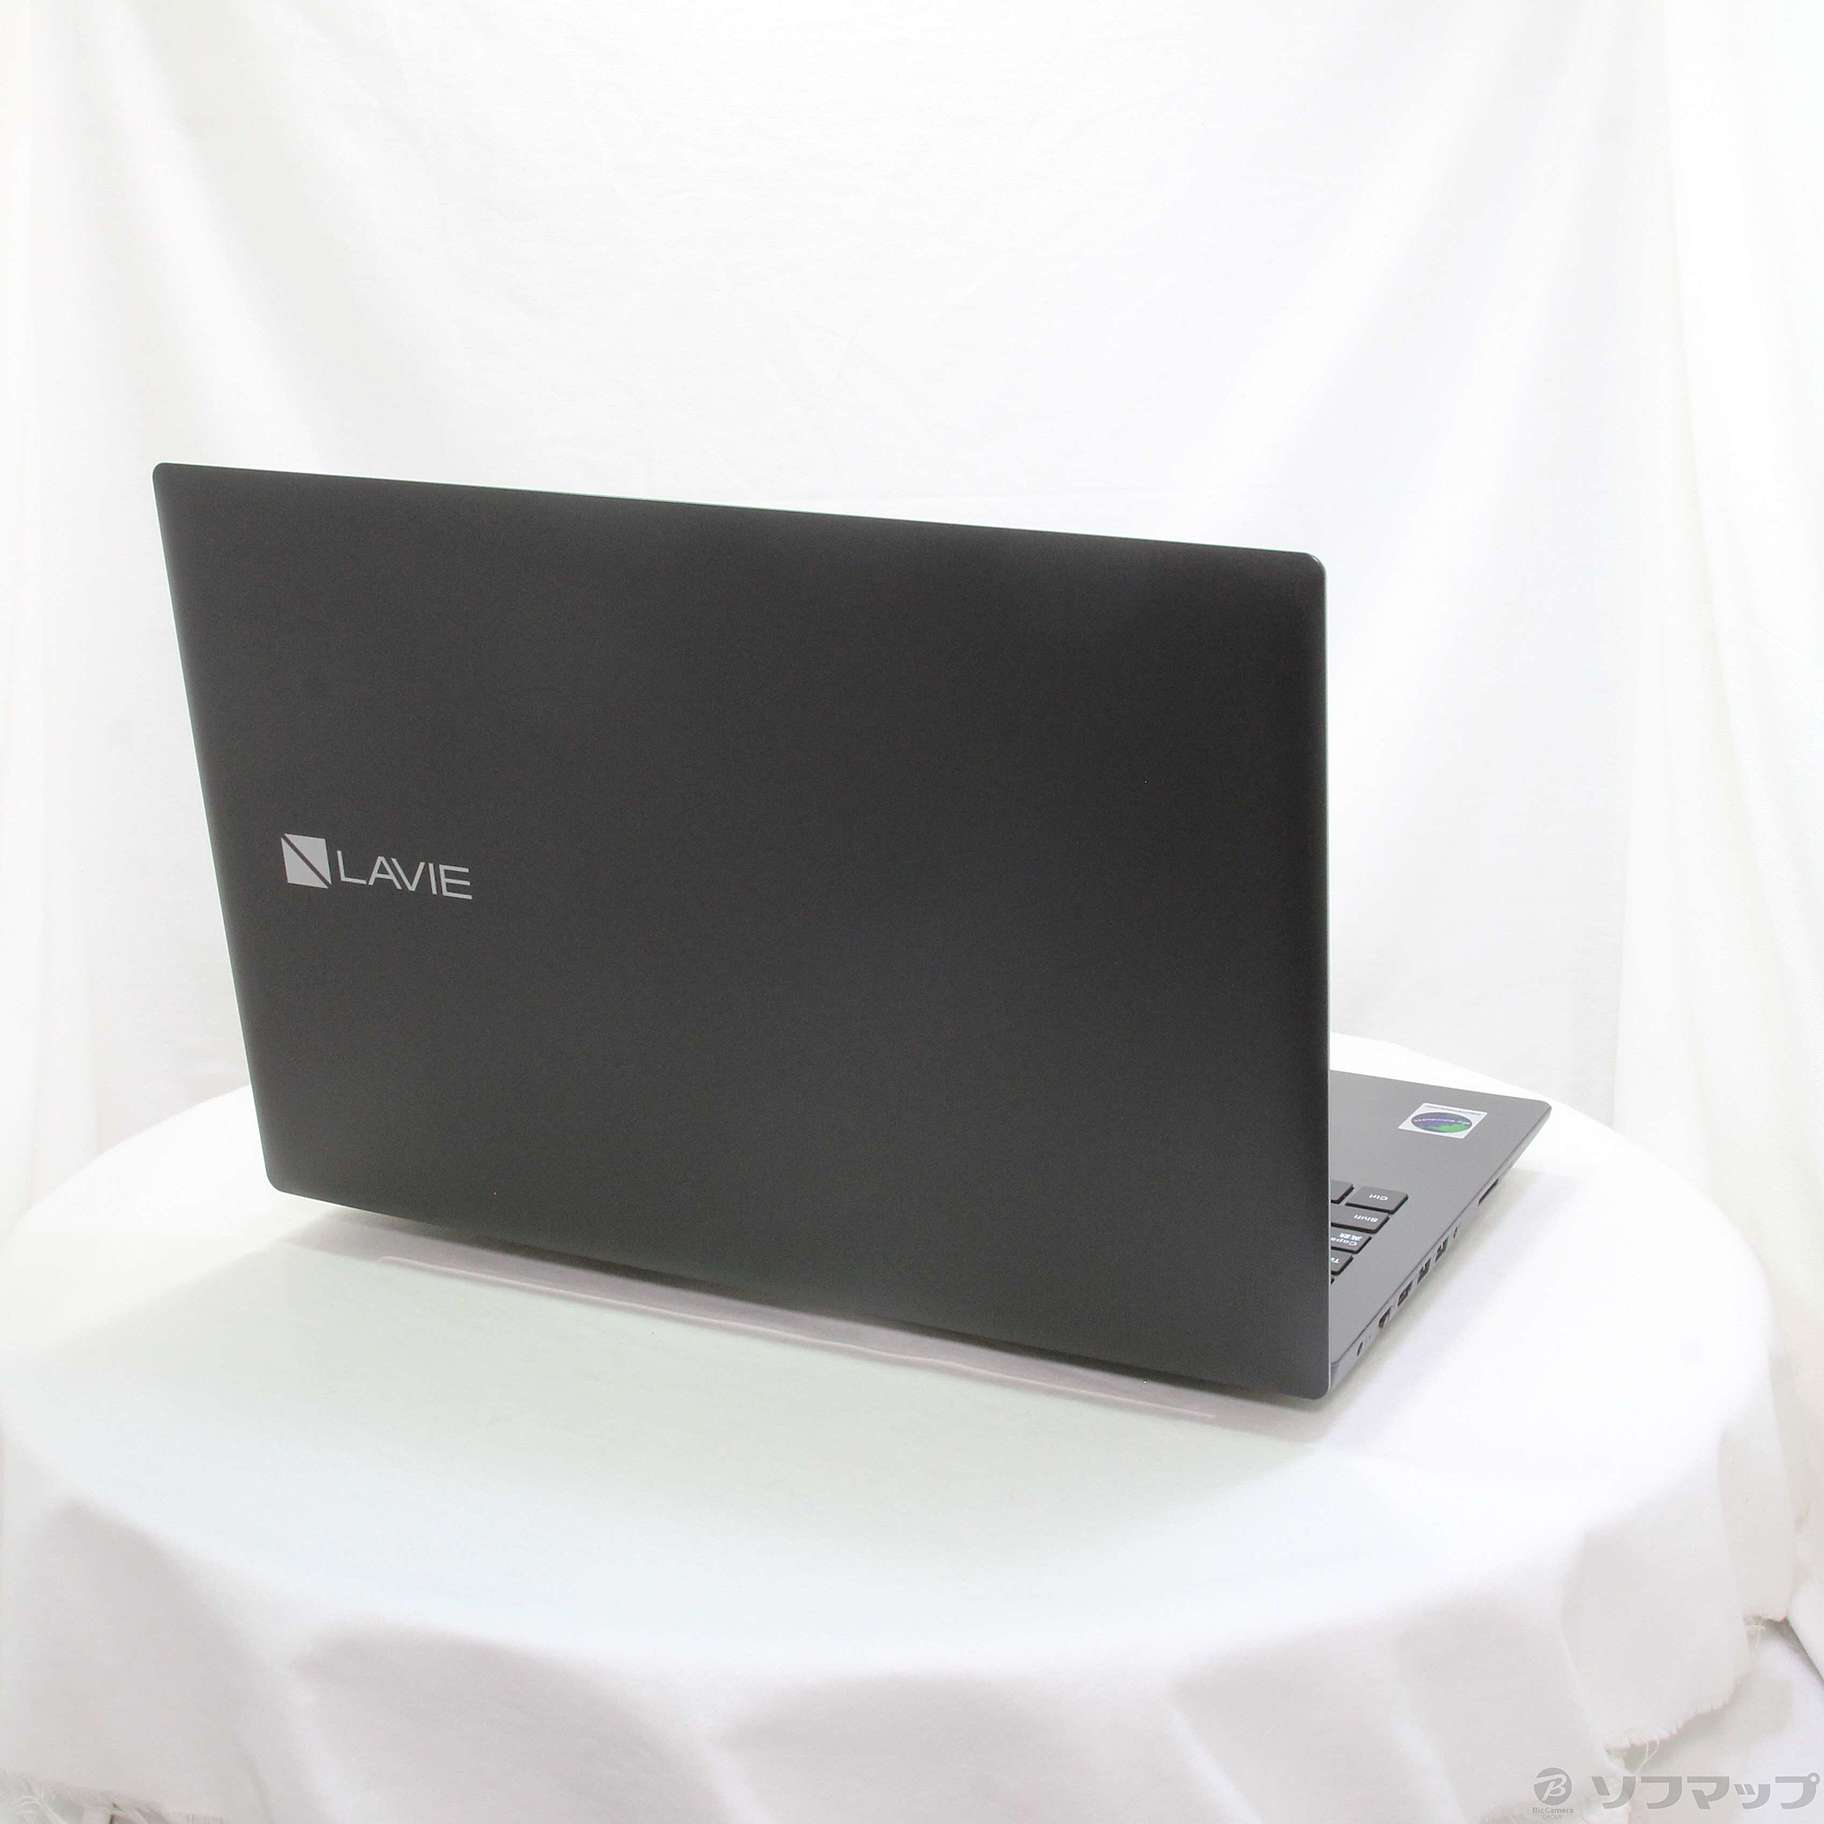 LAVIE Note Standard PC-NS150KAB-T カームブラック 〔NEC Refreshed PC〕 〔Windows 10〕  ≪メーカー保証あり≫ ［Celeron N4000 (1.1GHz)／4GB／HDD1TB／15.6インチワイド］